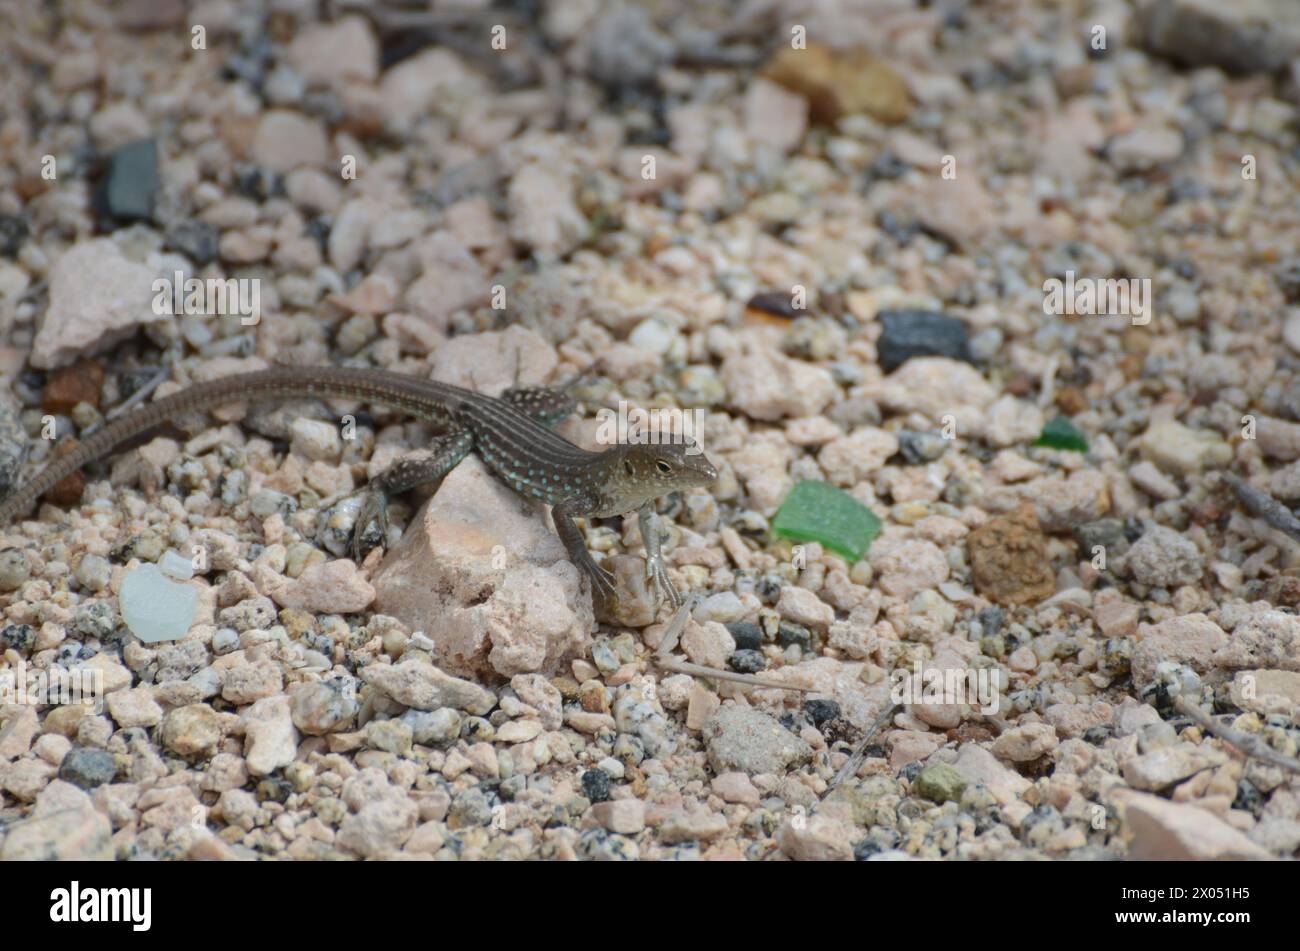 A lizard is on a rock in a desert. The lizard is small and brown. The rock is large and gray Stock Photo